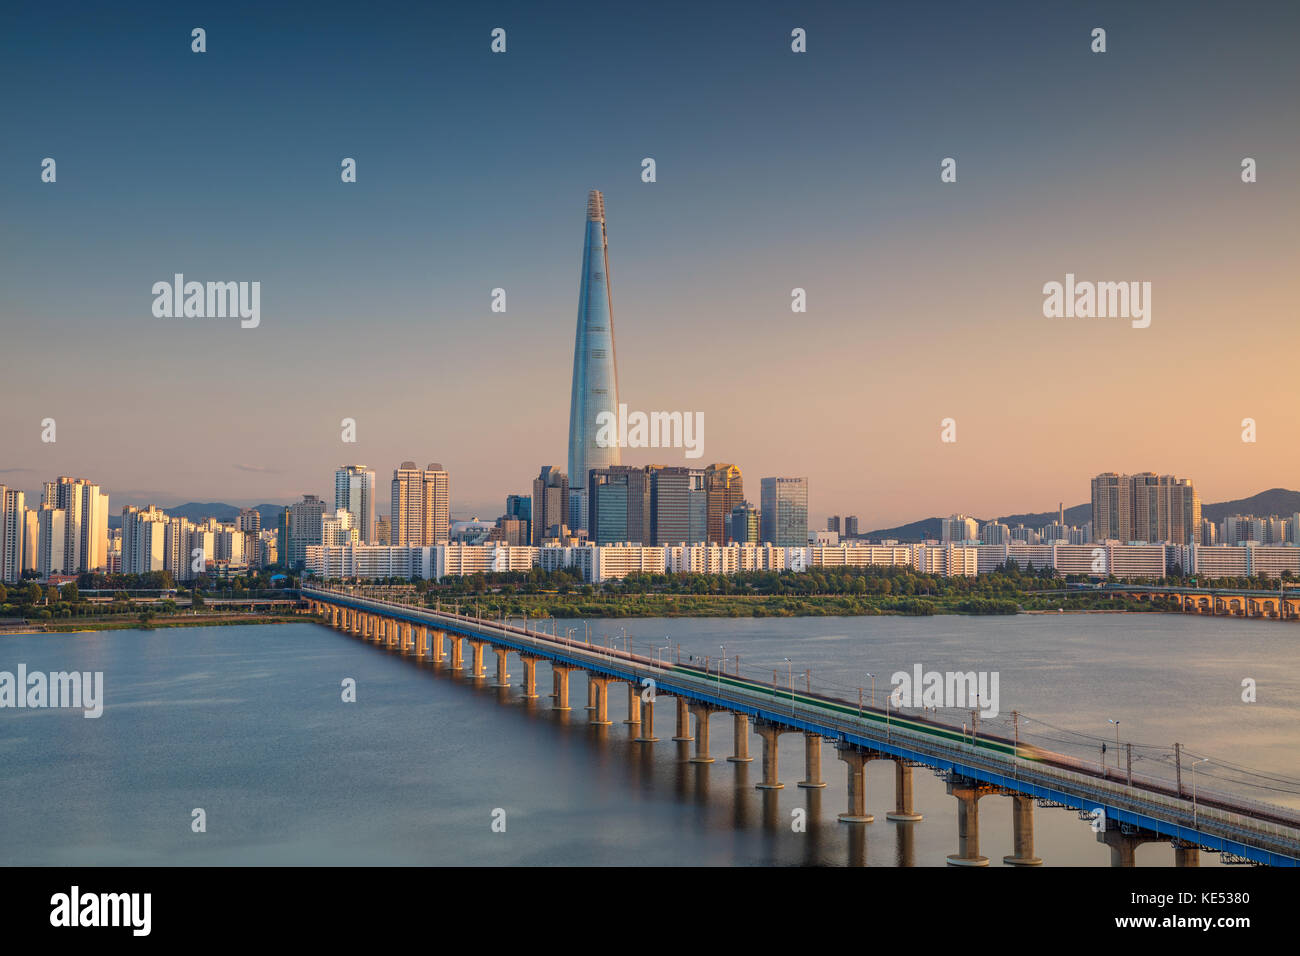 Seoul. Cityscape image of Seoul and Han River during sunset. Stock Photo